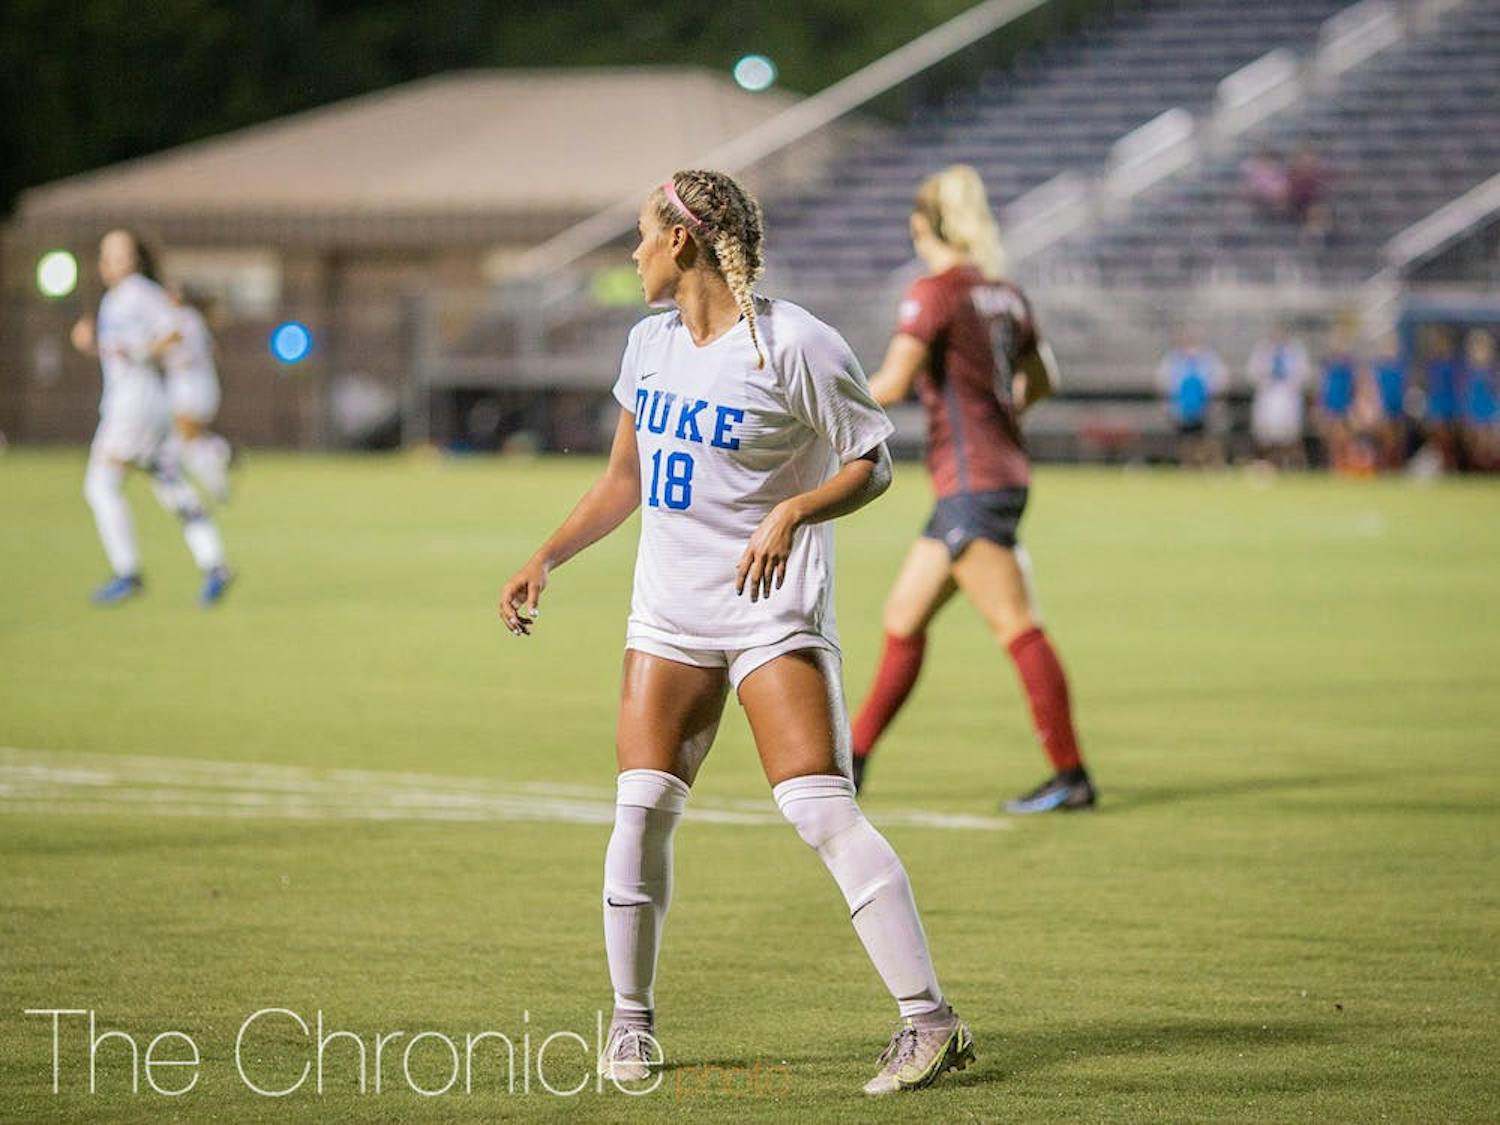 Duke women's soccer topples No. 6 TCU on the road in front of record